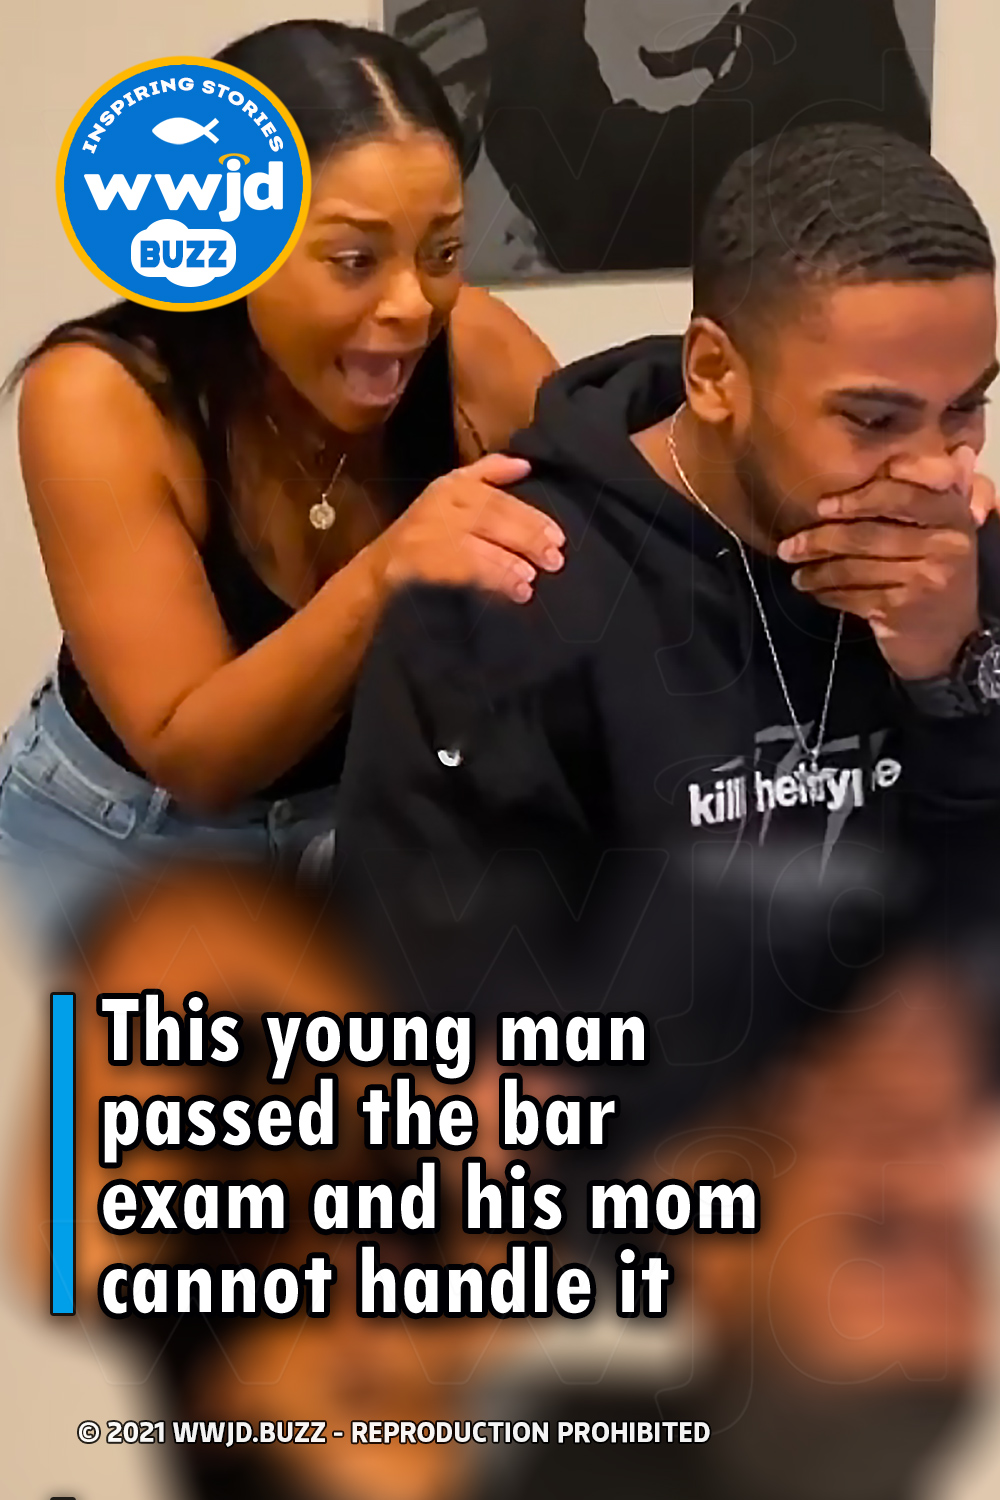 This young man passed the bar exam and his mom cannot handle it